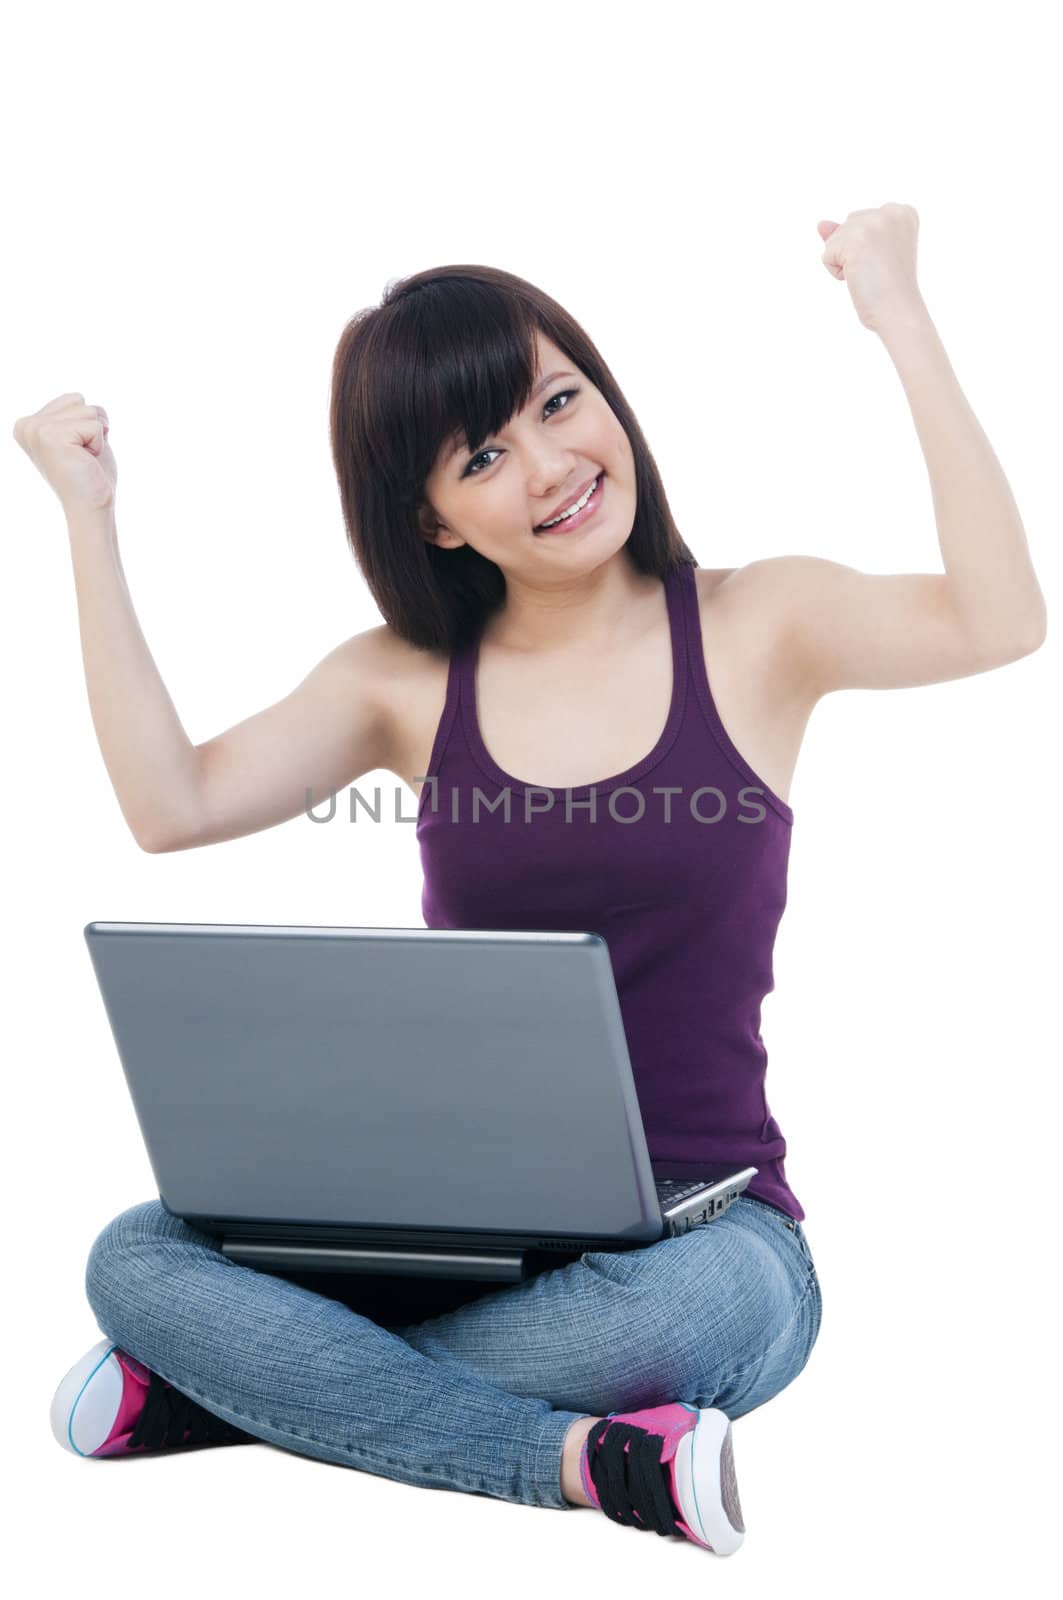 Portrait of a cute young woman sitting on floor with laptop and arms raised over white background.